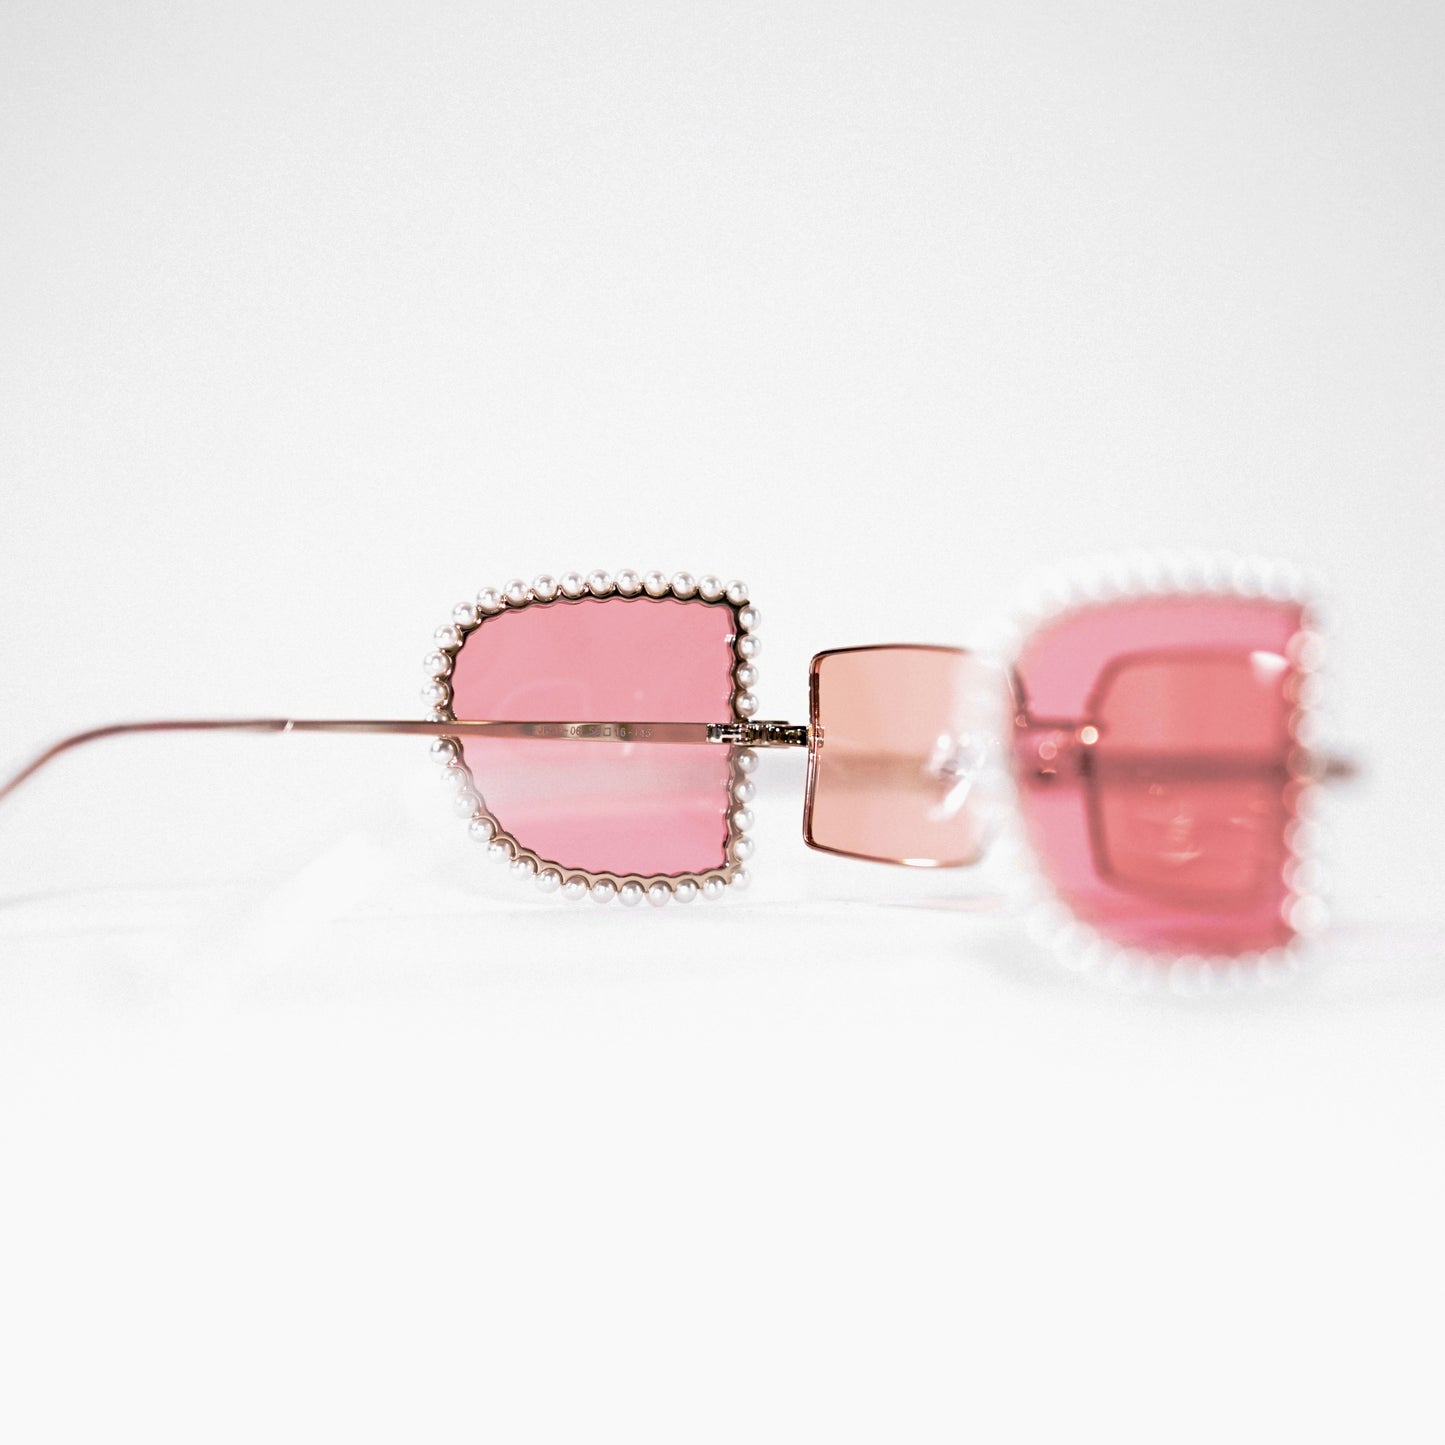 sunglasses with pearl rimmed pink windows opened and pink polaroid lens 45 angled